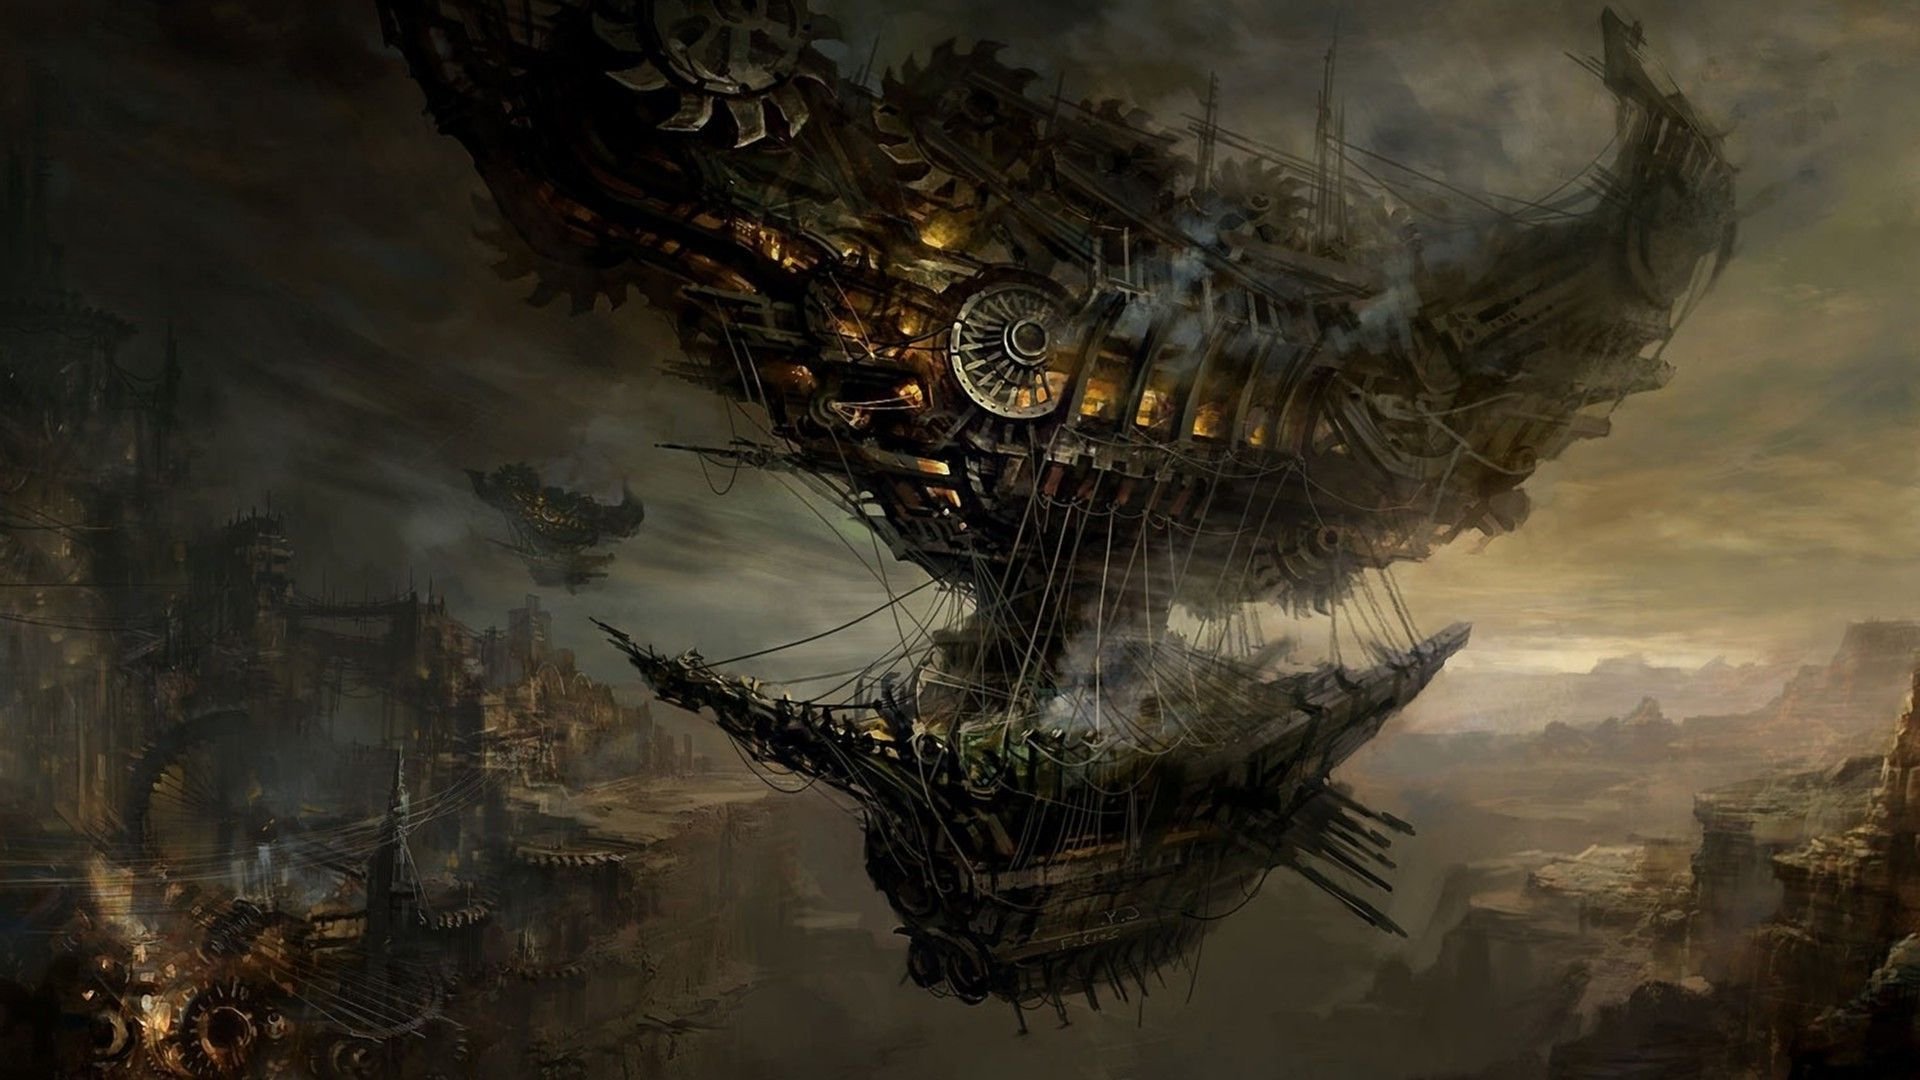 Steampunk 4K wallpaper for your desktop or mobile screen free and easy to download